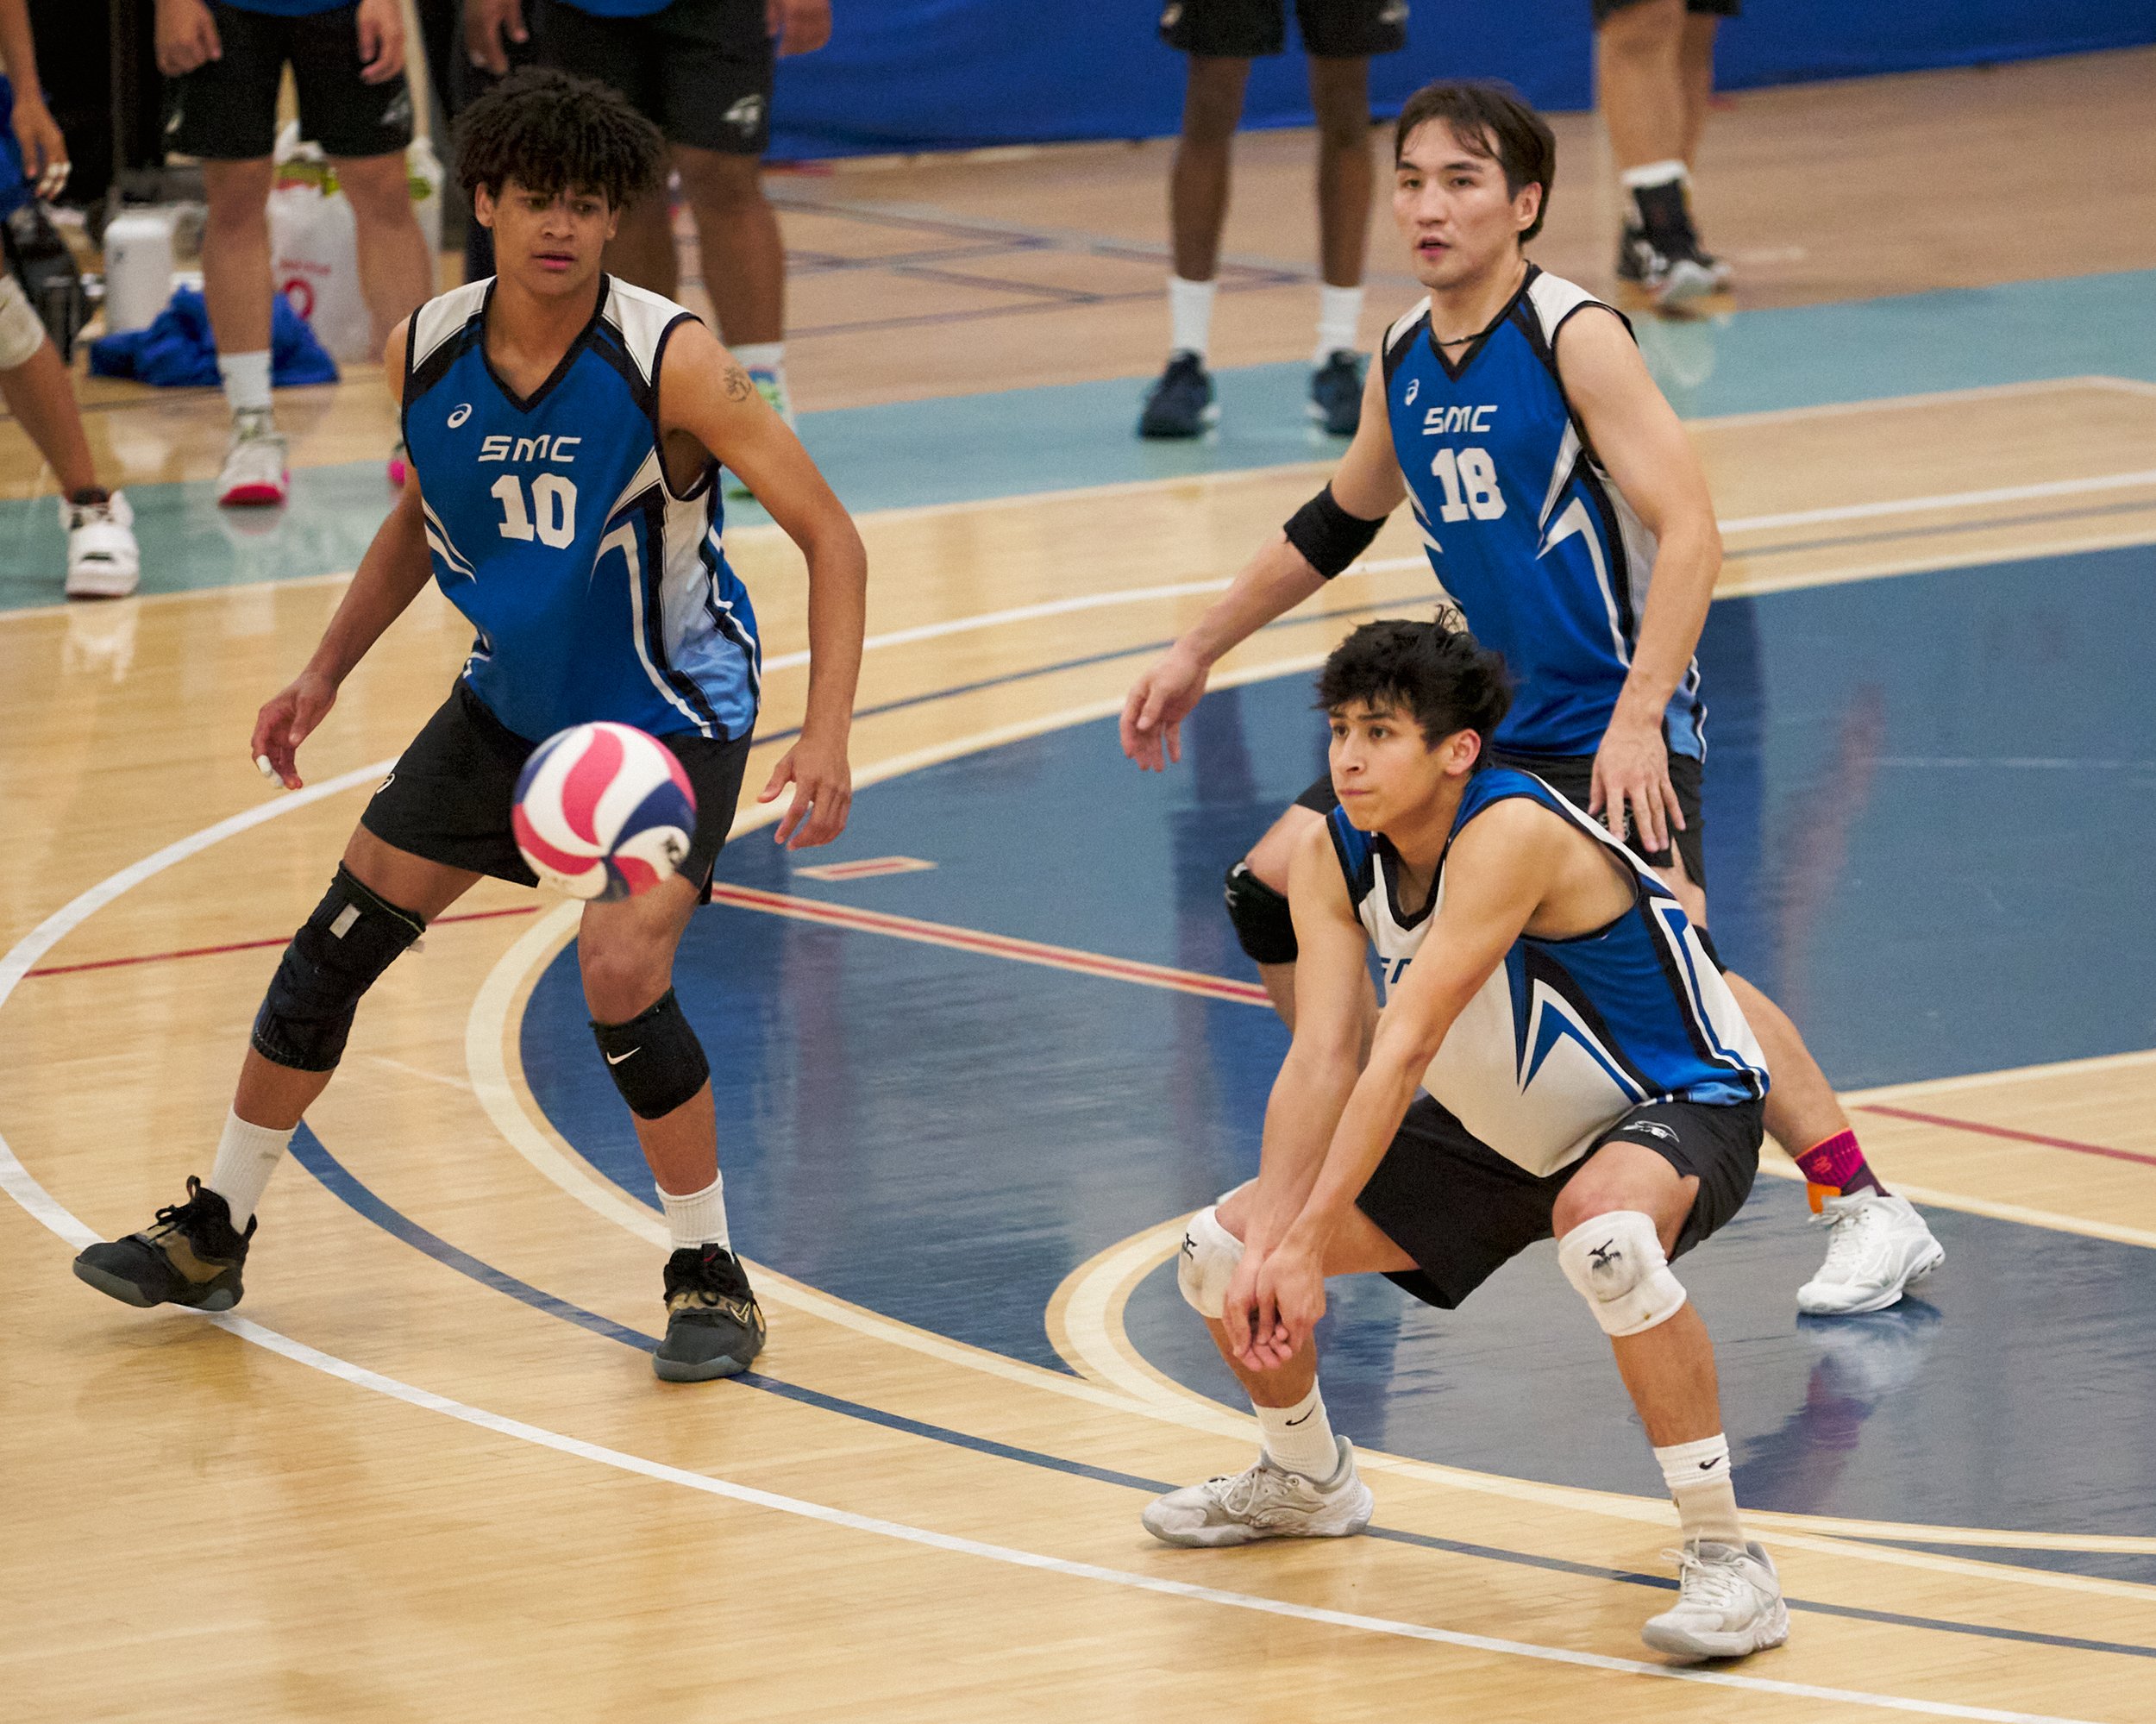  Santa Monica College Corsairs' Nate Davis, Javier Castillo (front right), and Enkhtur Tserendavaa (rear right) during the men's volleyball match against the Irvine Valley College Lasers on Friday, Feb. 24, 2023, at Corsair Gym in Santa Monica, Calif